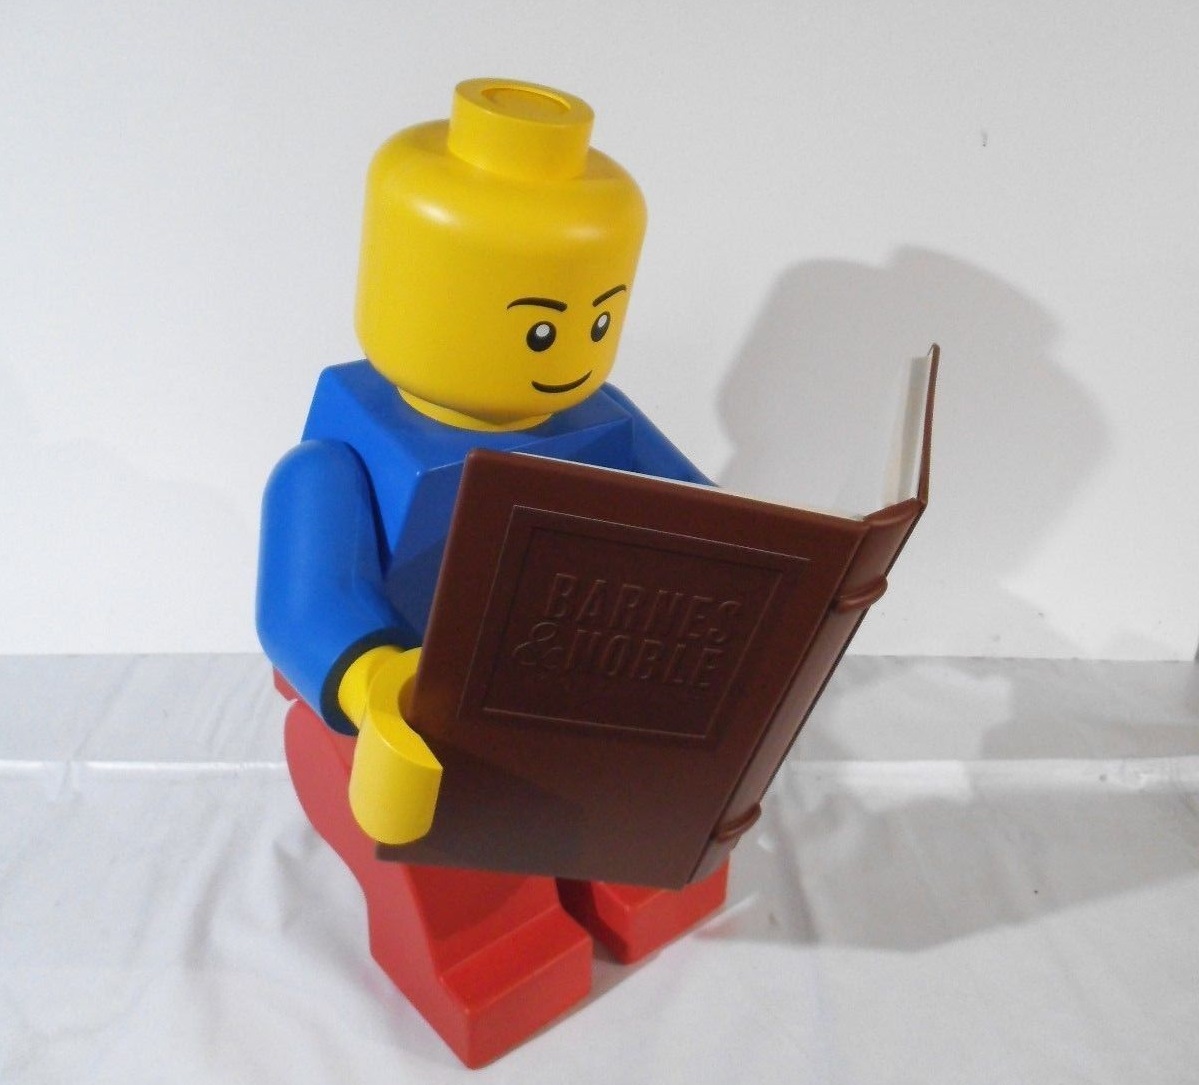 Tung lastbil Diligence Rådgiver Lego Barnes and Noble Store Display Large Scale Minifigure with Book in  sitting position - Minifigure Price Guide